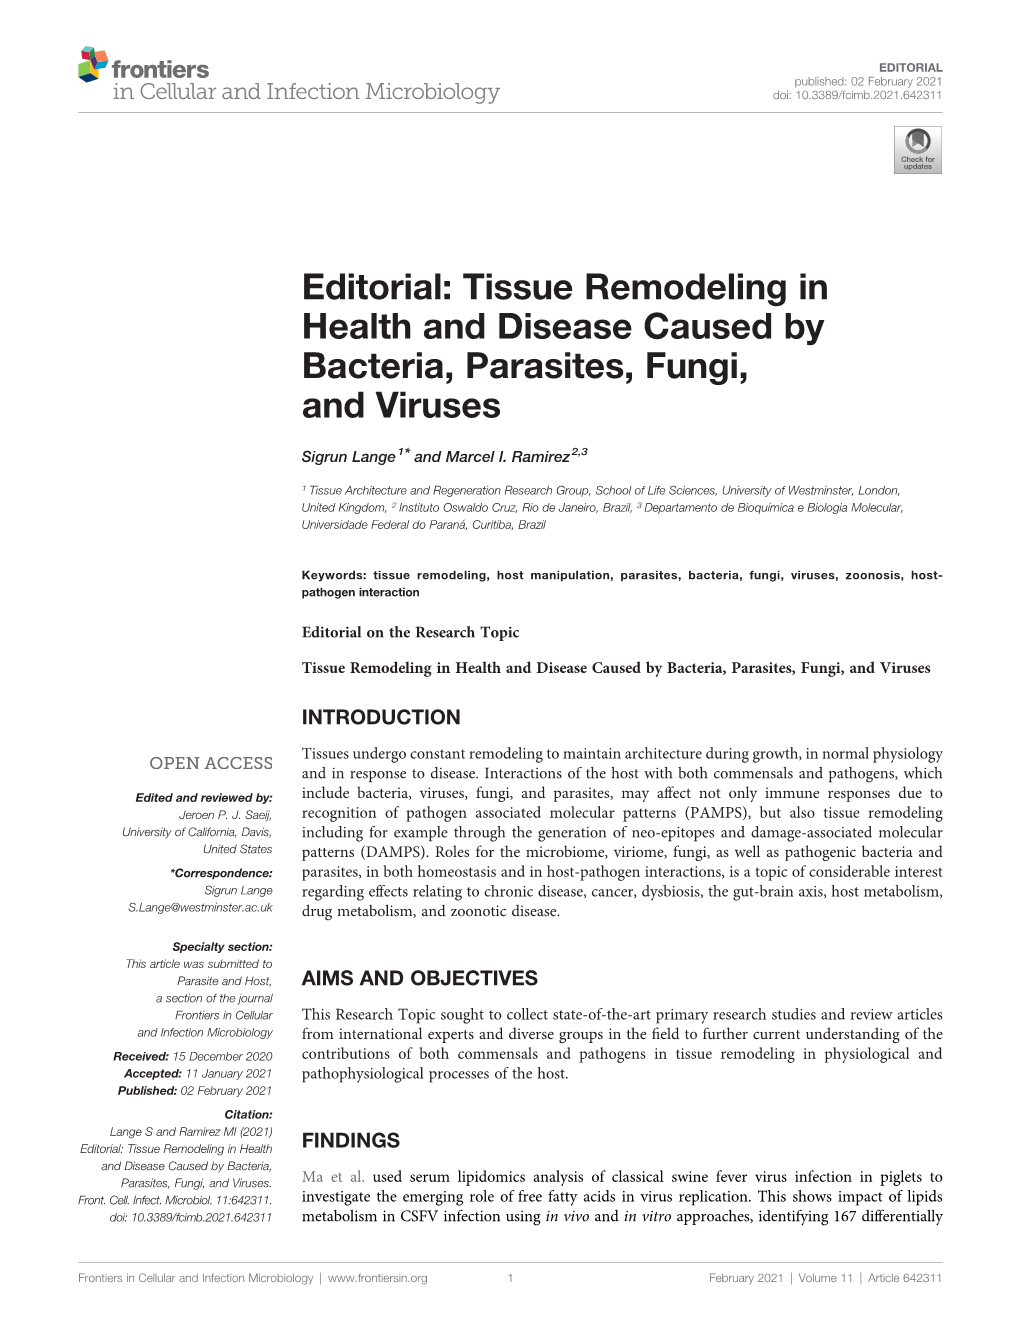 Editorial: Tissue Remodeling in Health and Disease Caused by Bacteria, Parasites, Fungi, and Viruses